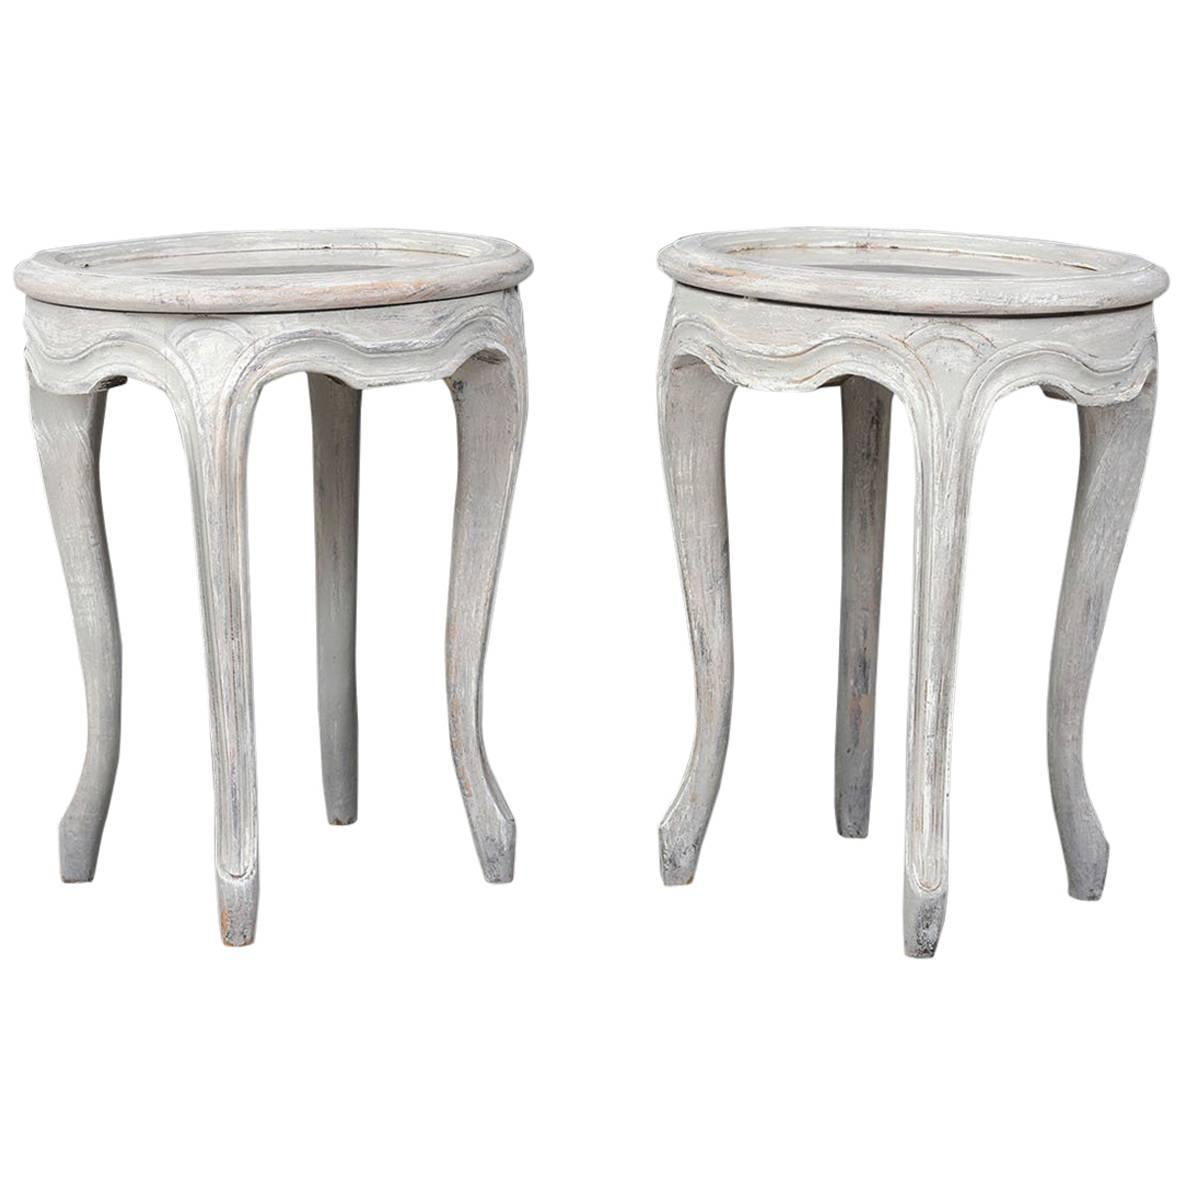 Pair of Provincial-Style Painted Garden Stools